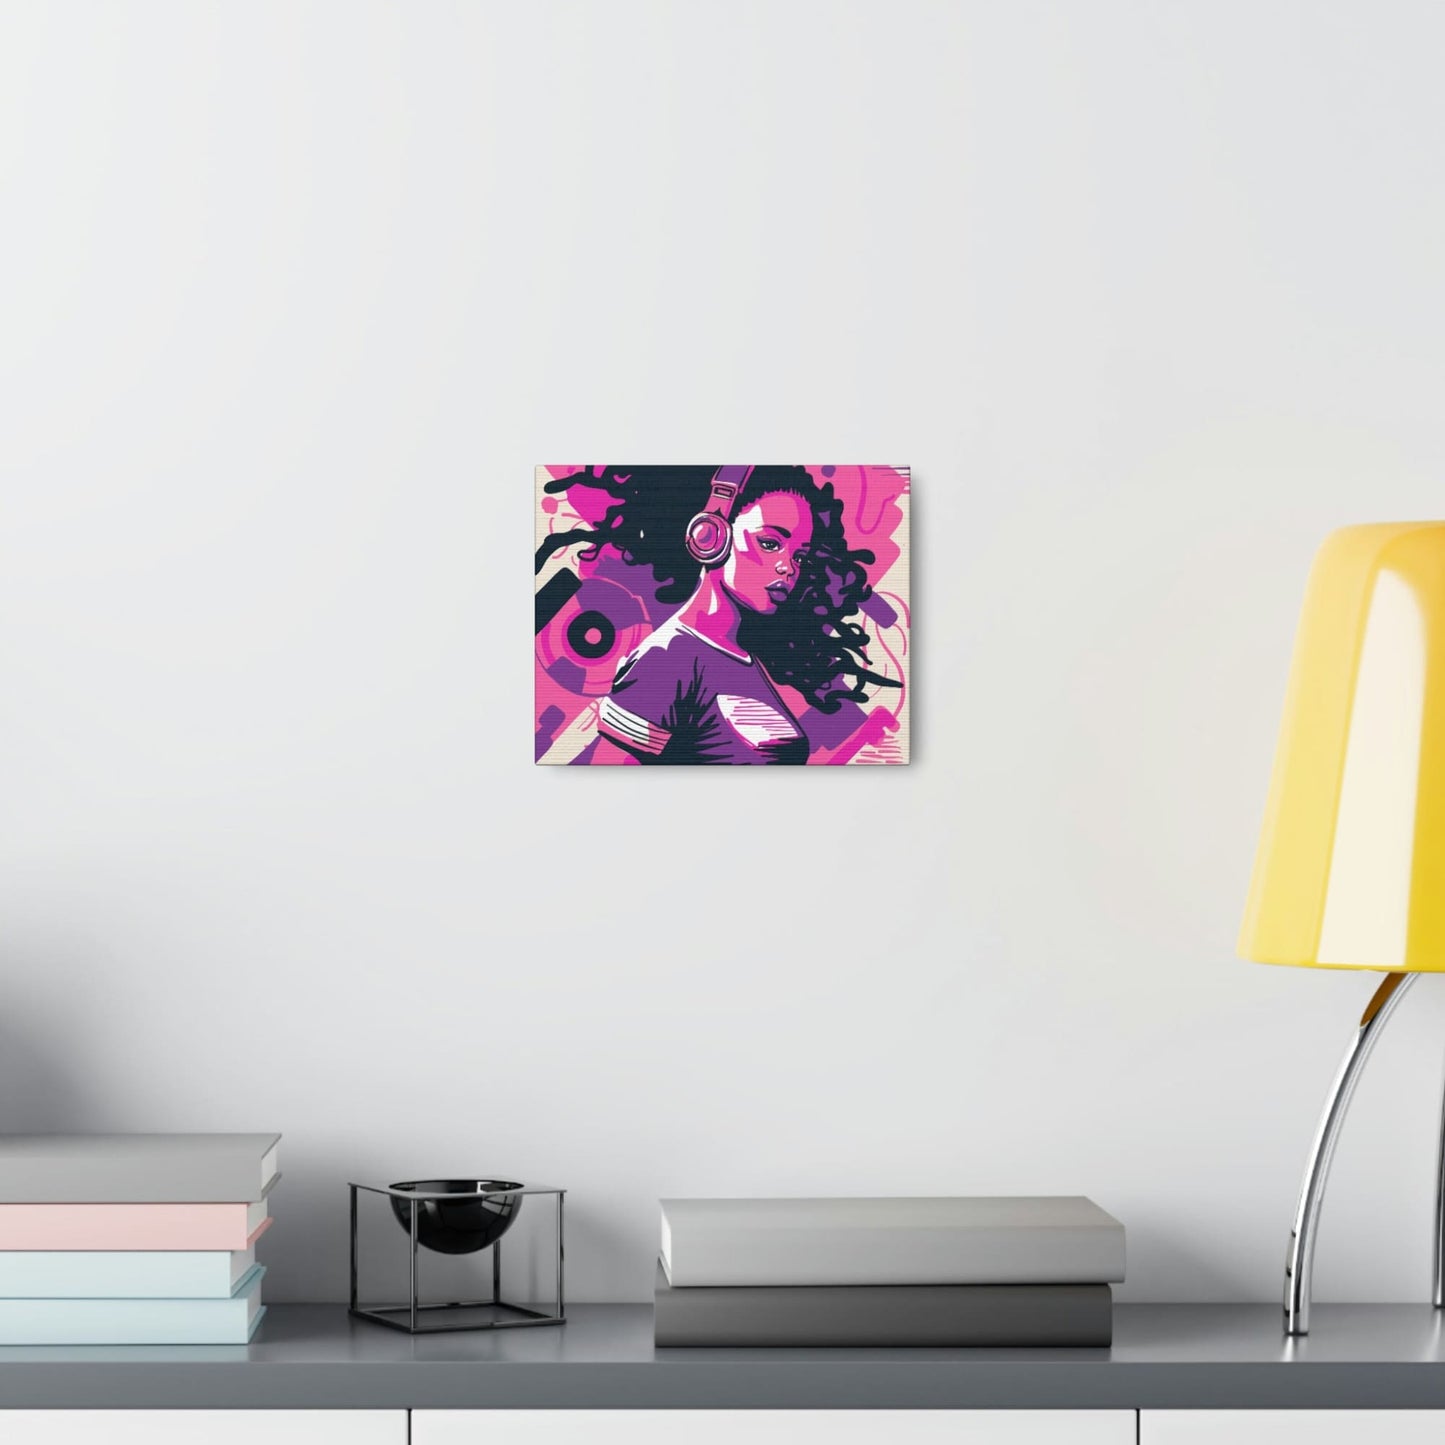 Music in My Ears Canvas Gallery Wraps - High Quality and Durable Prints - CosmicMedium